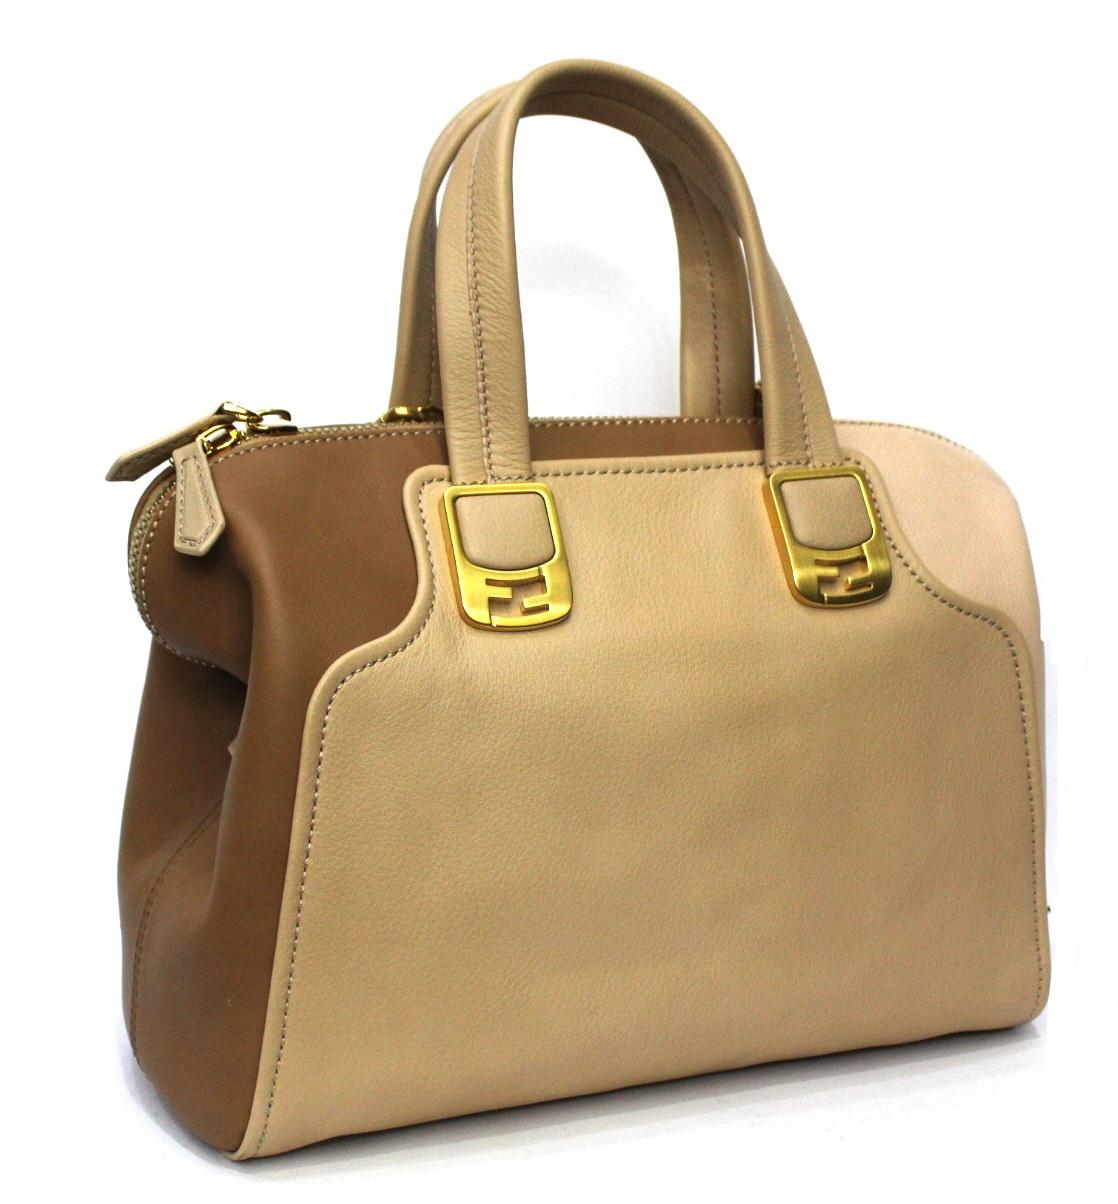 Chameleon Fendi bag made of brown and beige leather with golden hardware.

Equipped with leather handles and adjustable shoulder strap. Zip closure, internally capacious.

The bag is in excellent condition.